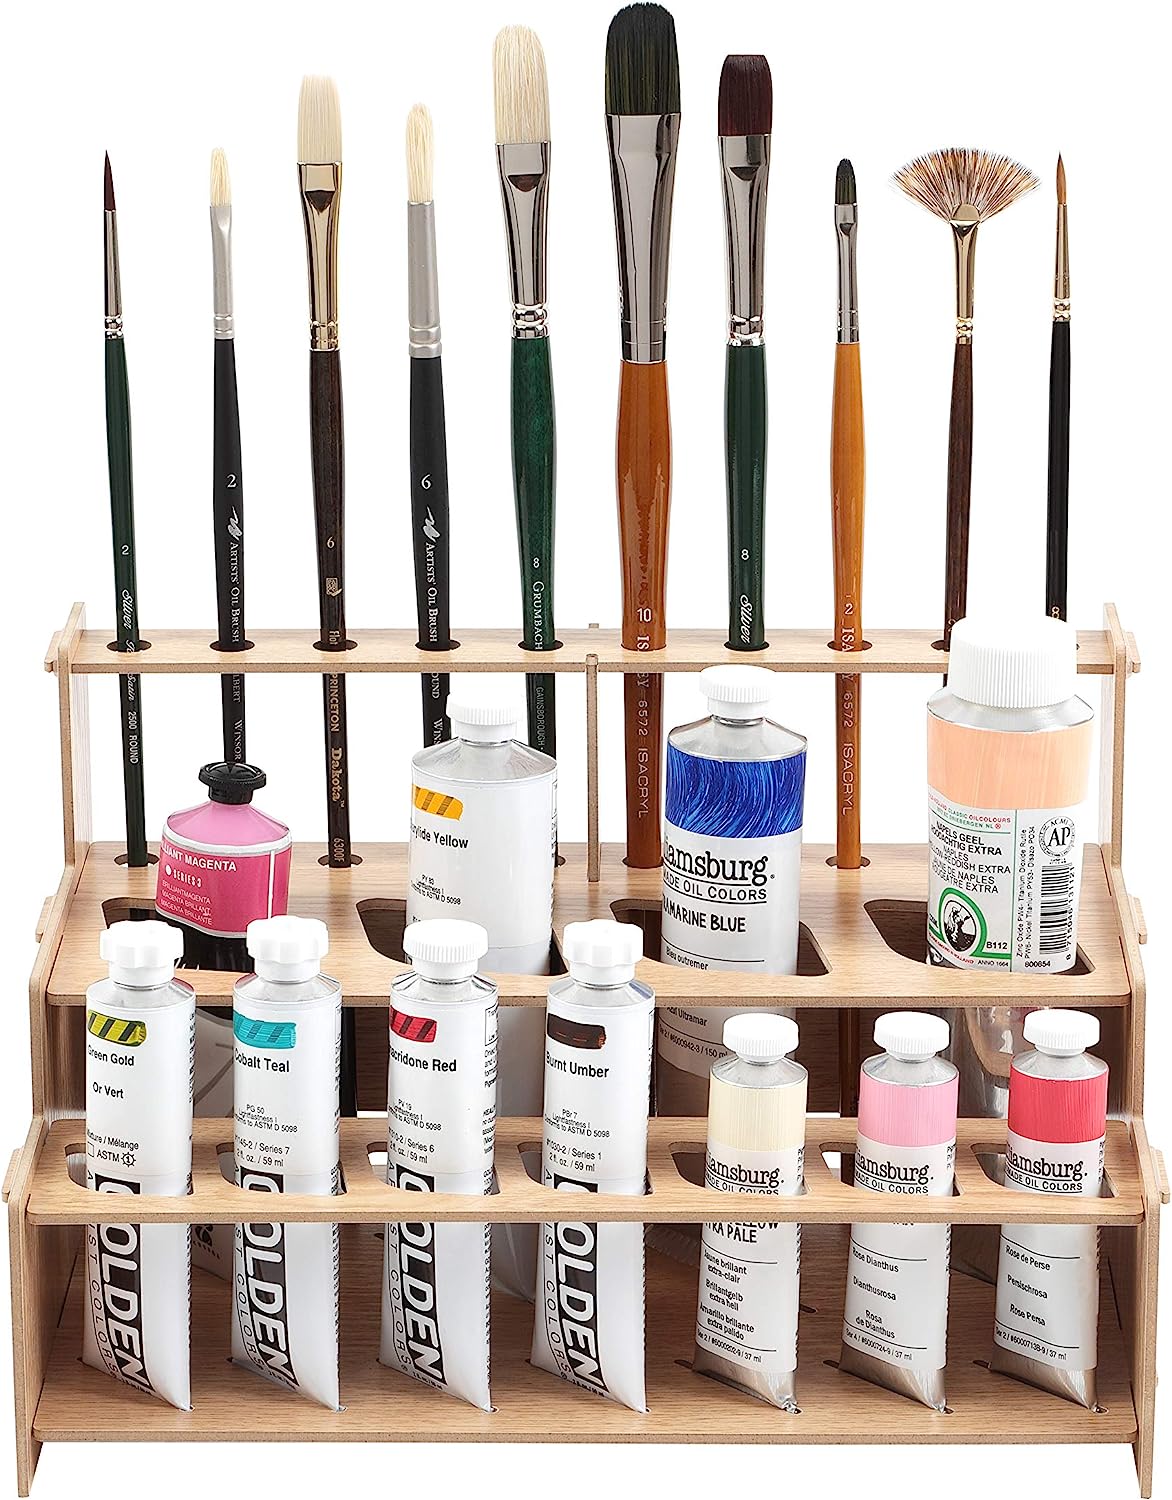 Mezzo Artist Paint and Brush Straight Rack 1 - Wood Grain Laminate Multi Layer Desk Stand Professional Storage Display Organizer for Paintbrushes and